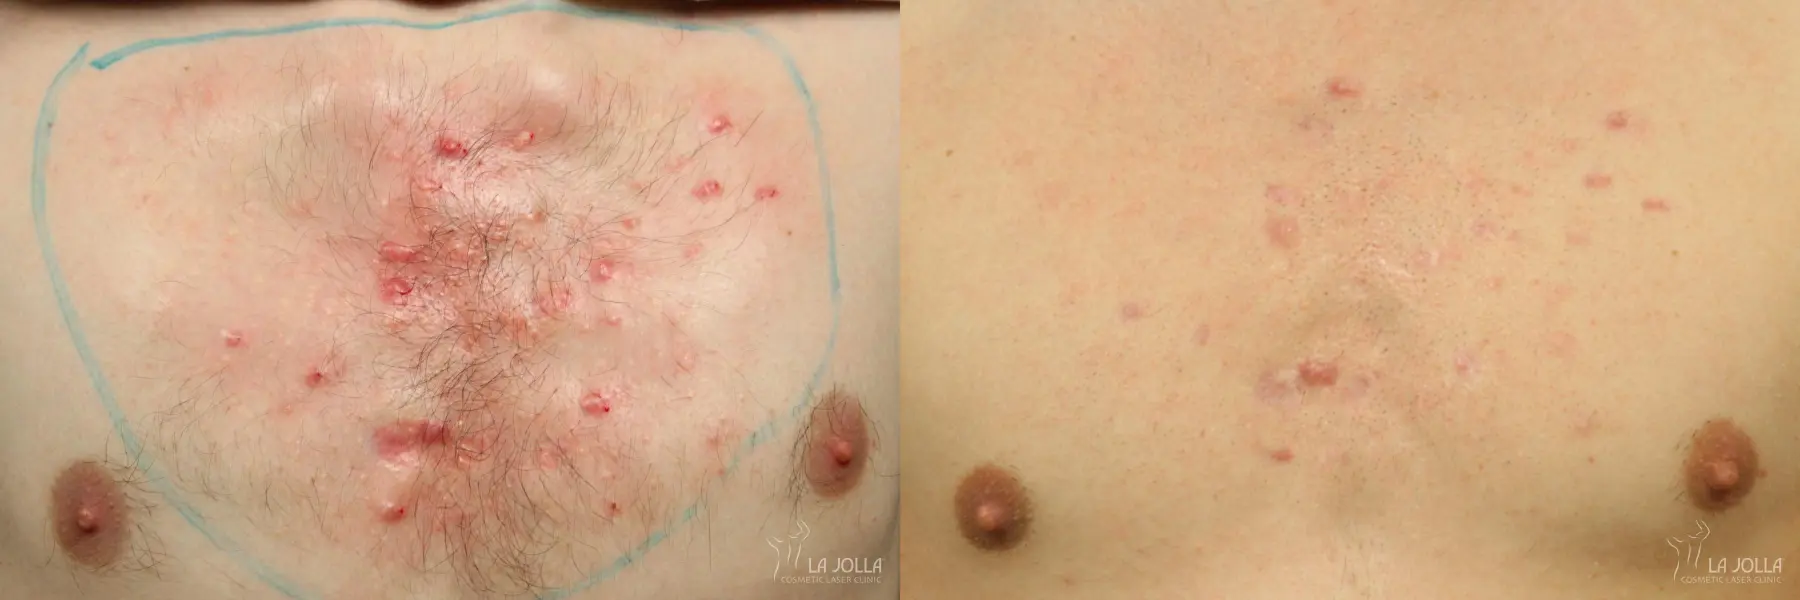 Fraxel®: Patient 2 - Before and After 1